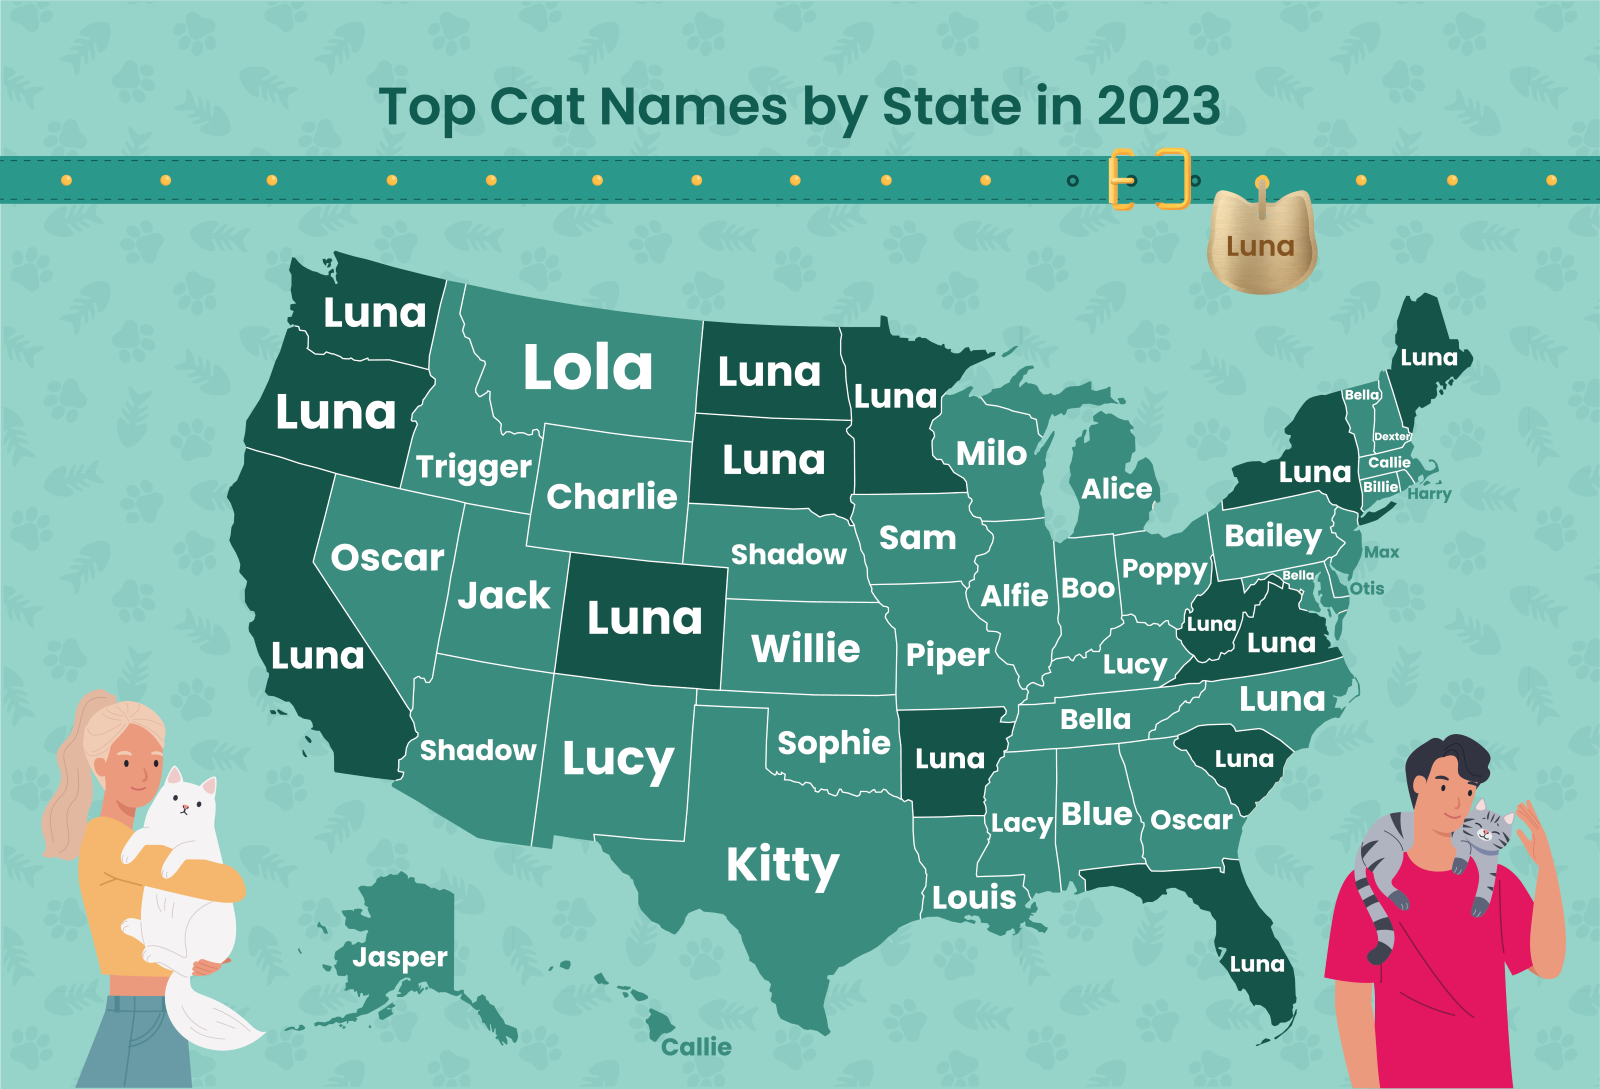 What are the Most Popular Cat Names?